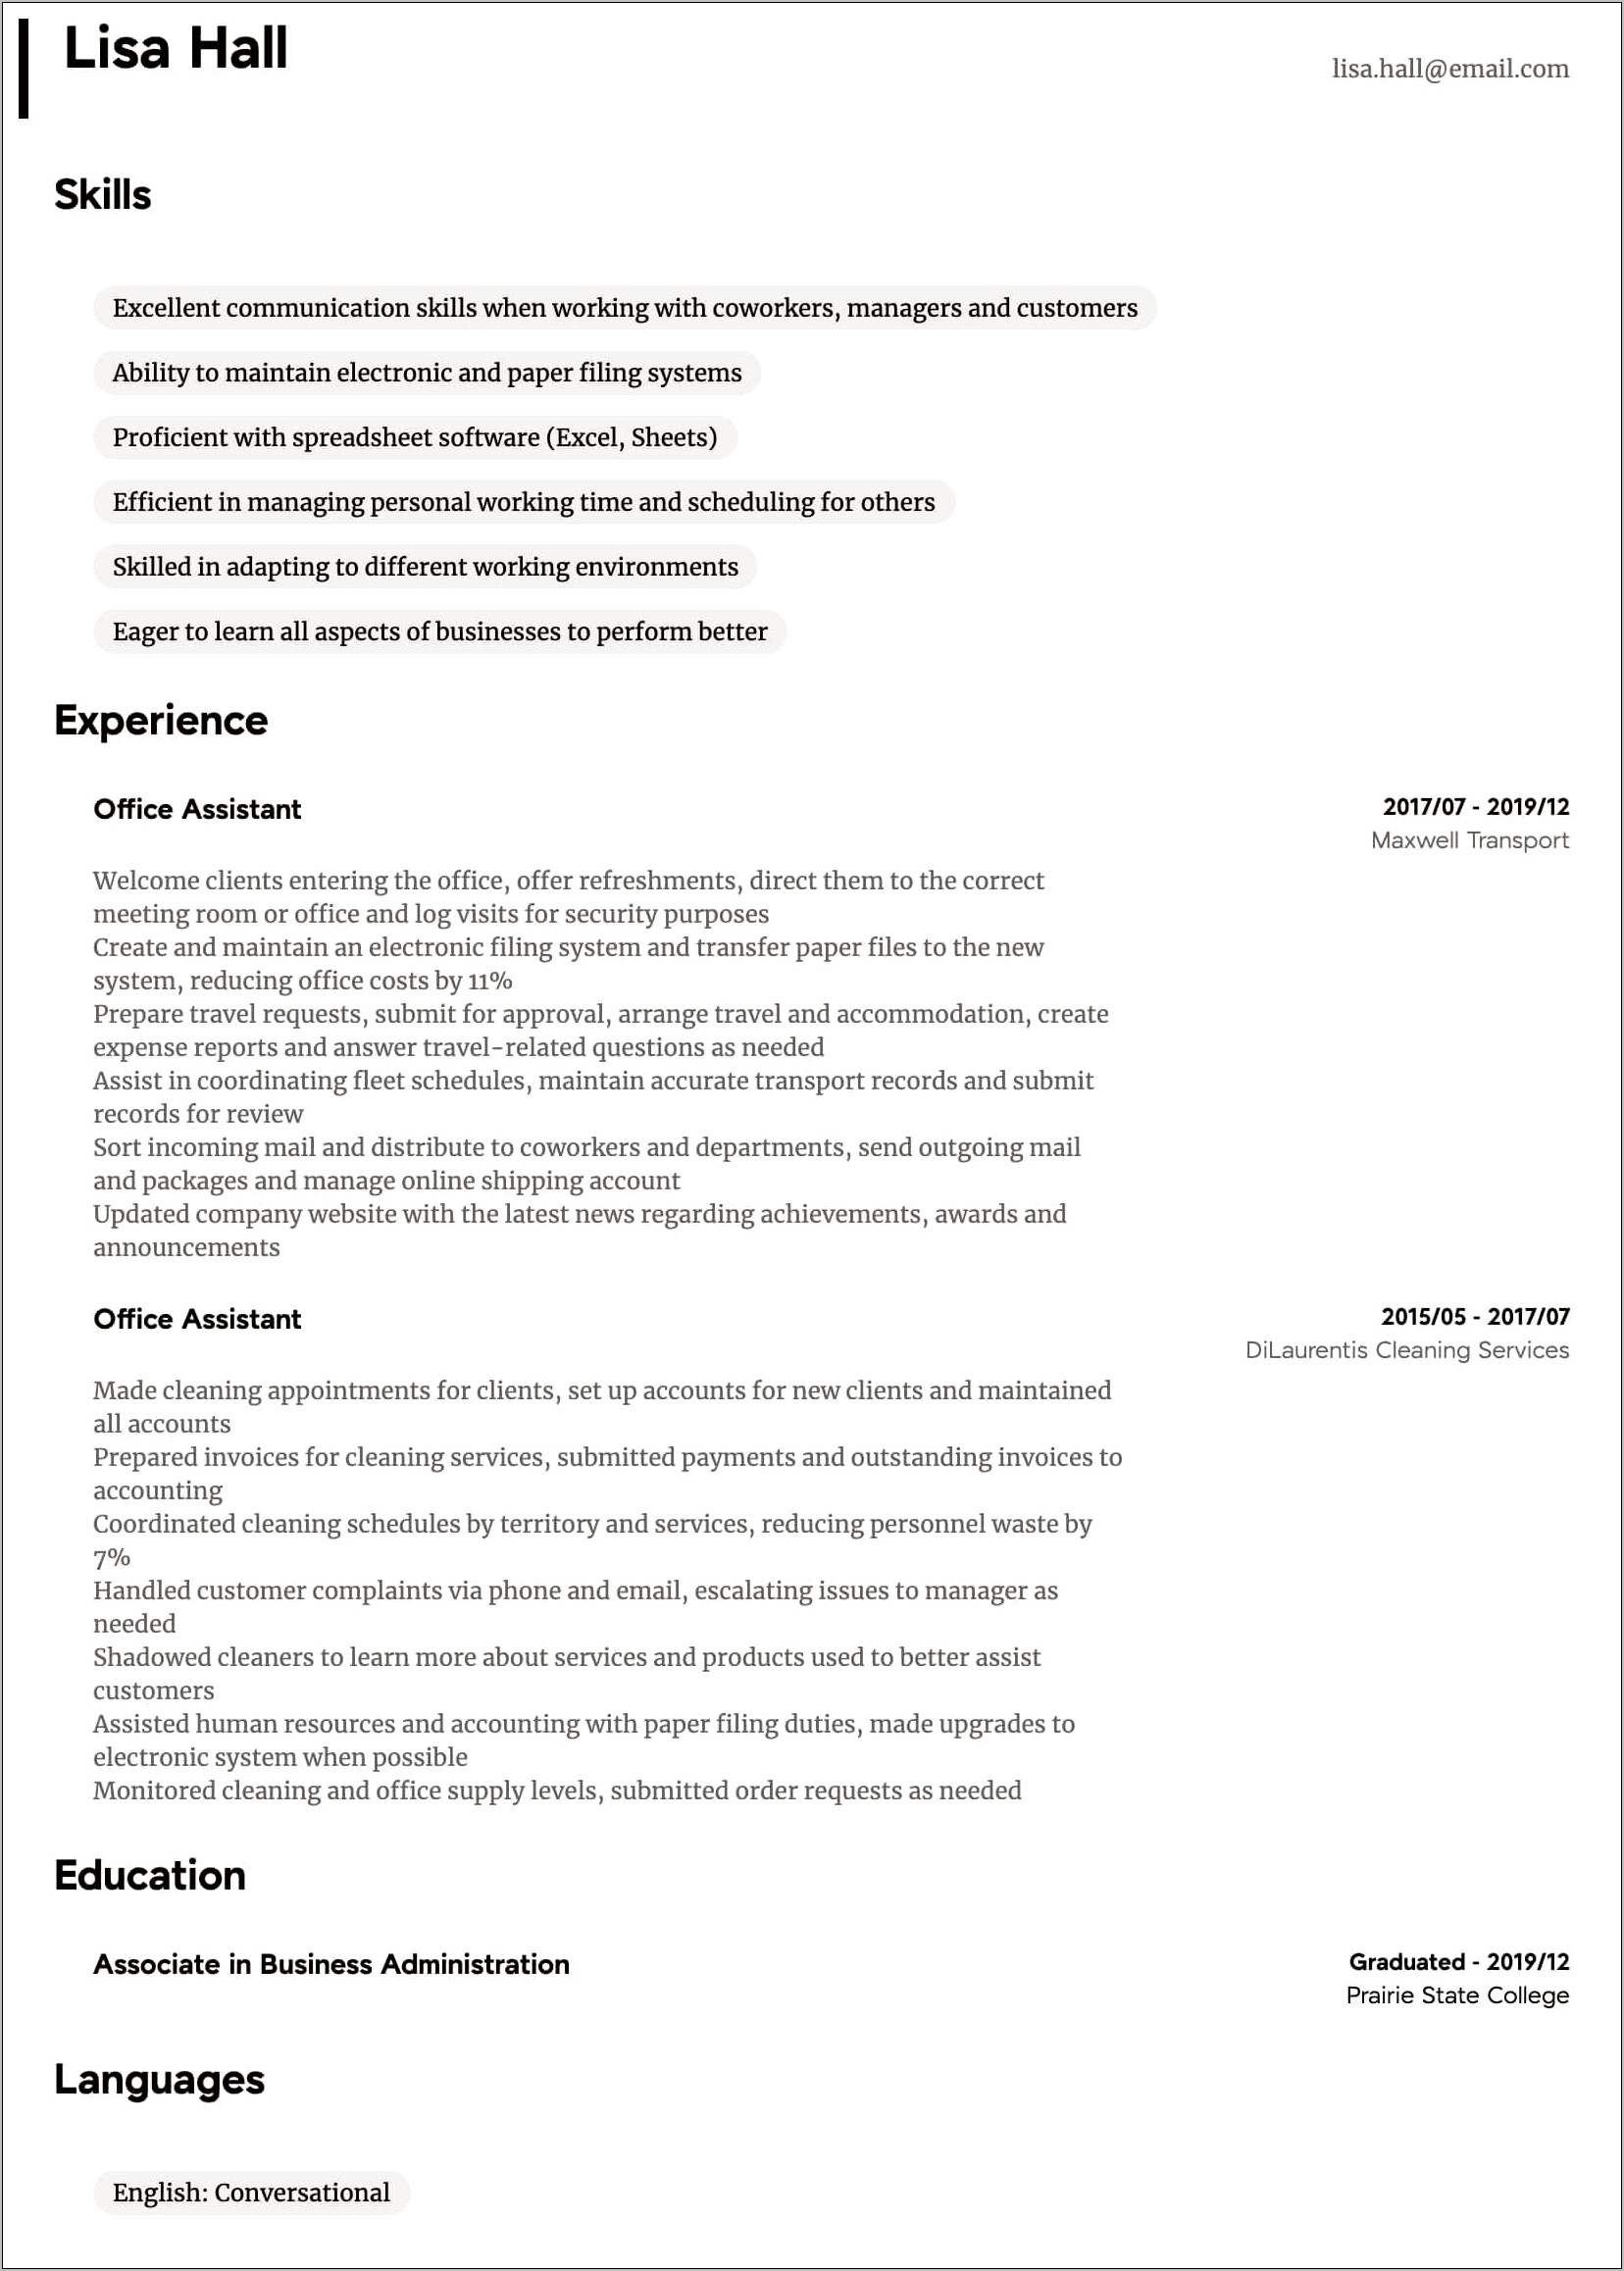 Resume For An Office Assistant Job